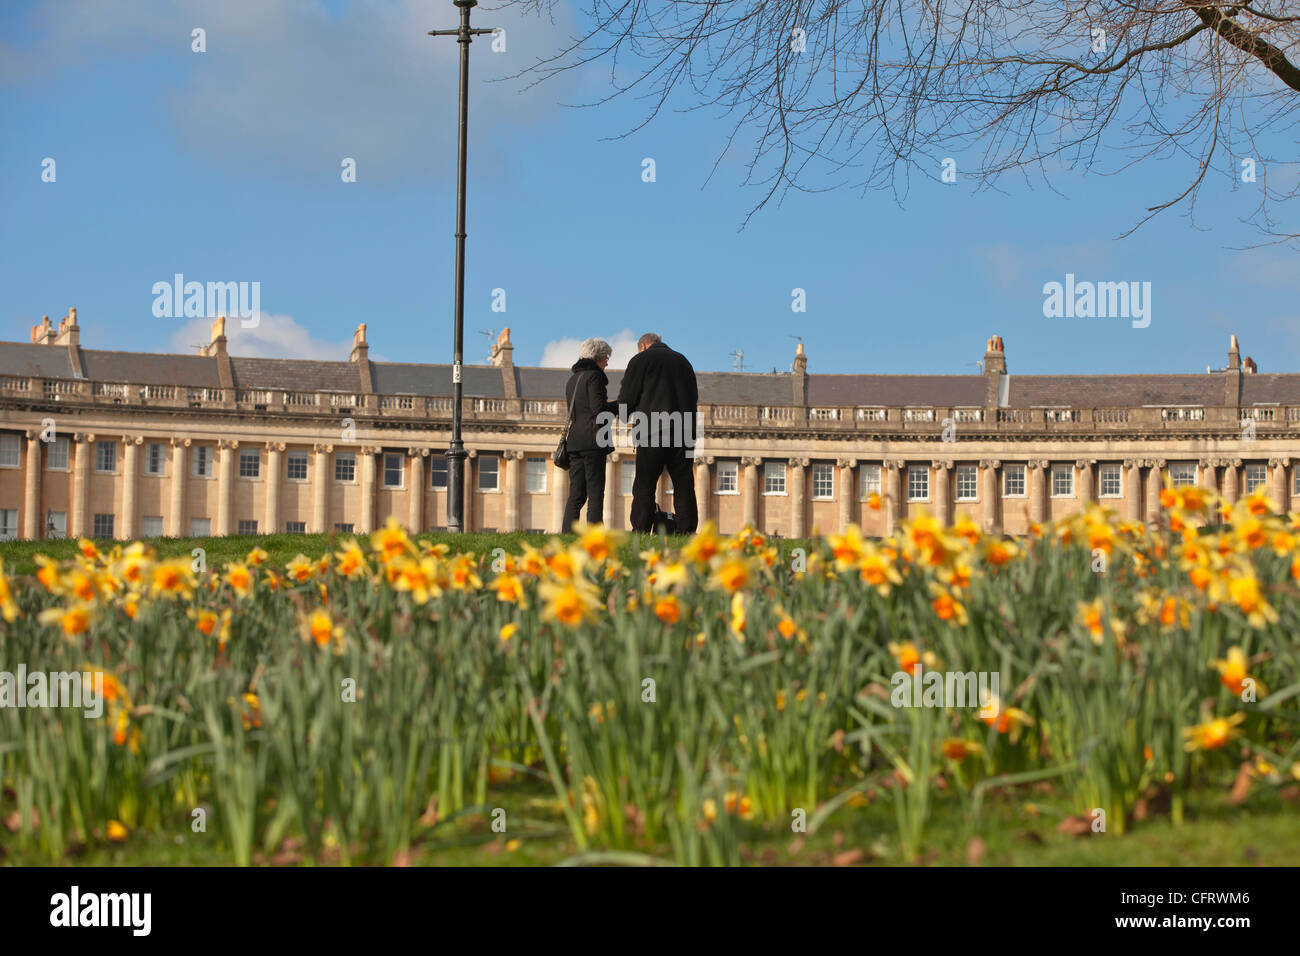 Tourists looking at the Royal Crescent, Bath, Somerset, in Spring with daffodils Stock Photo